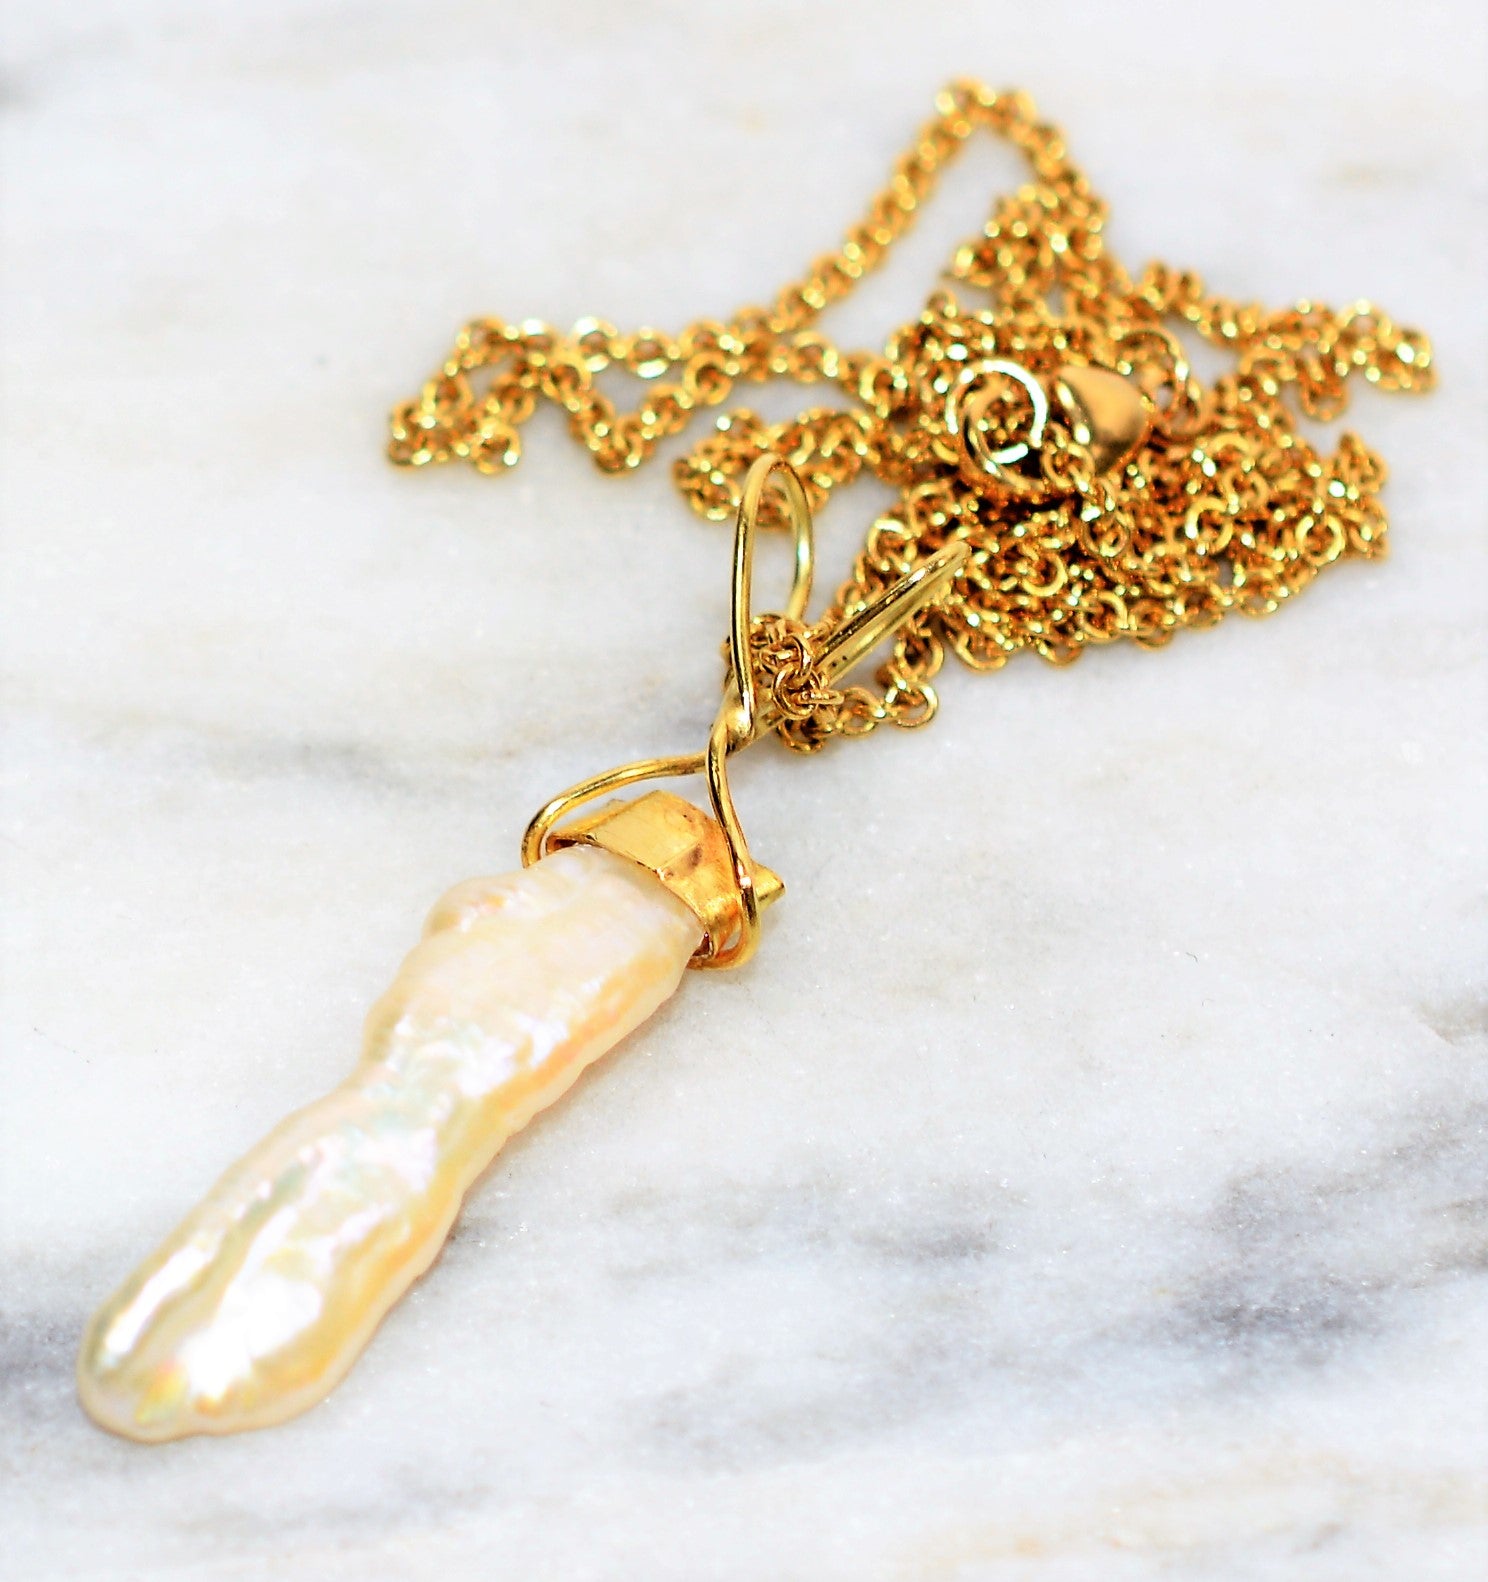 Baroque BIWA Stick Pearl Necklace 18K Solid Gold Necklace Cocktail Necklace Pendant Necklace Vintage Necklace Antique Jewelry Estate Jewelry